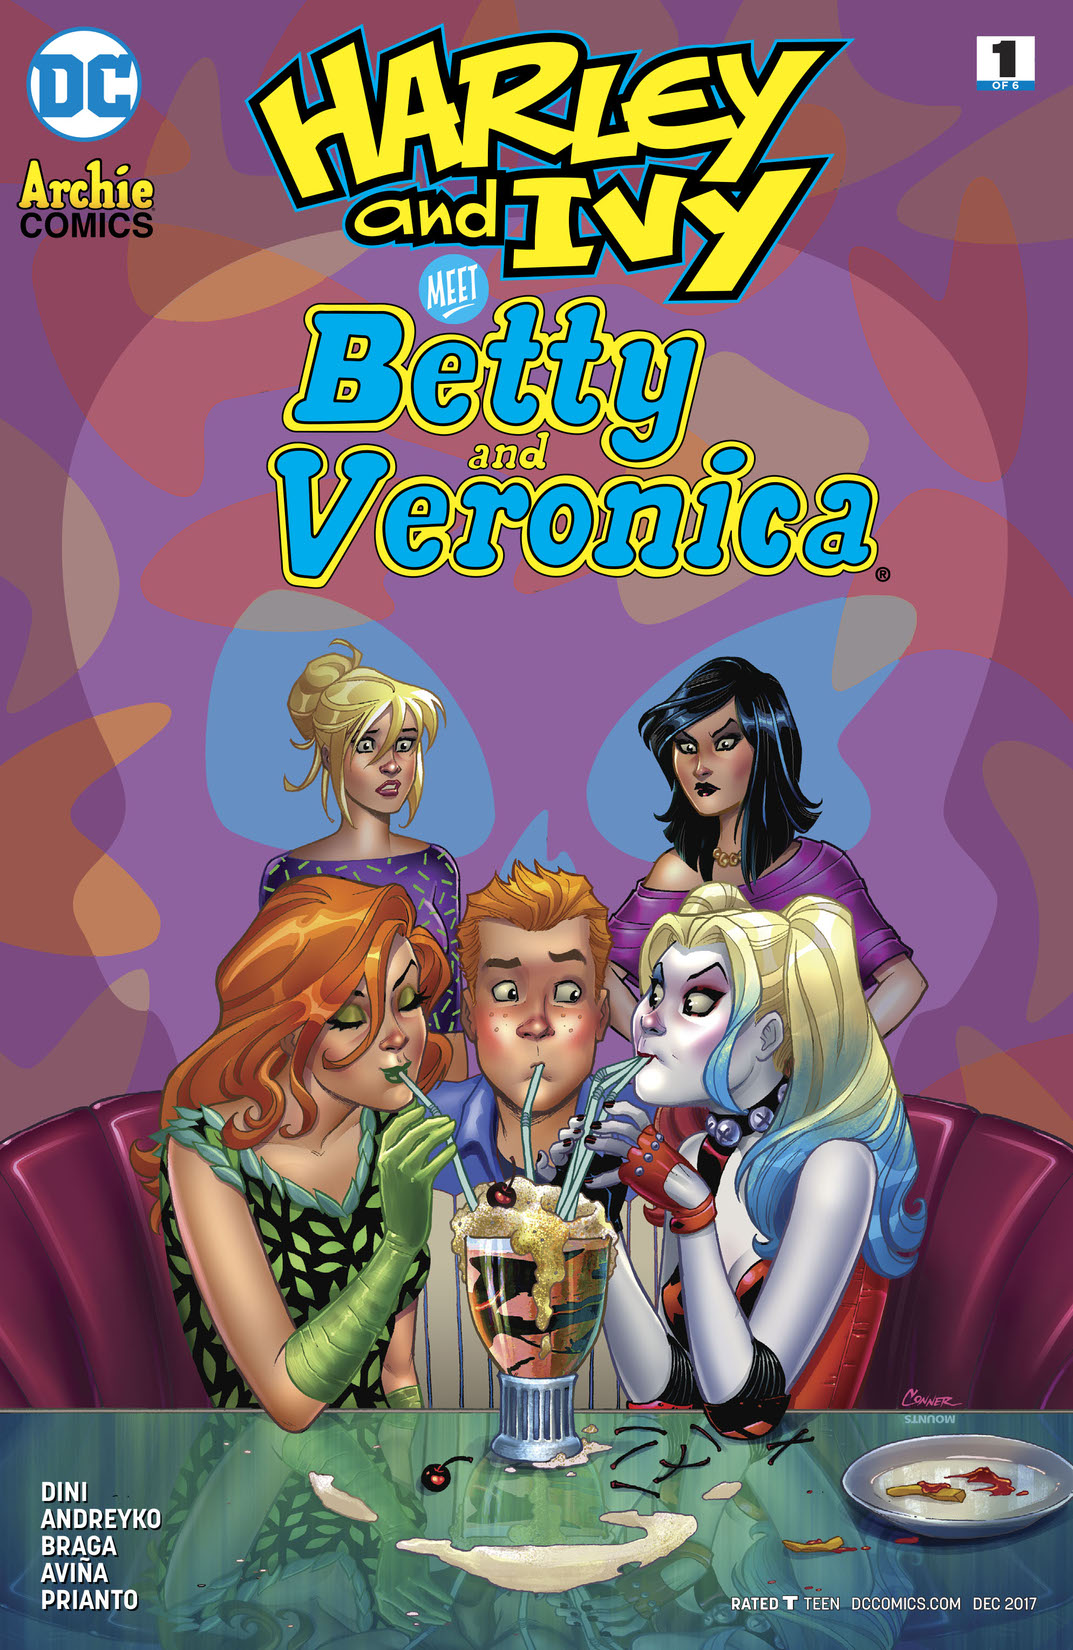 Harley & Ivy Meet Betty and Veronica #1 preview images